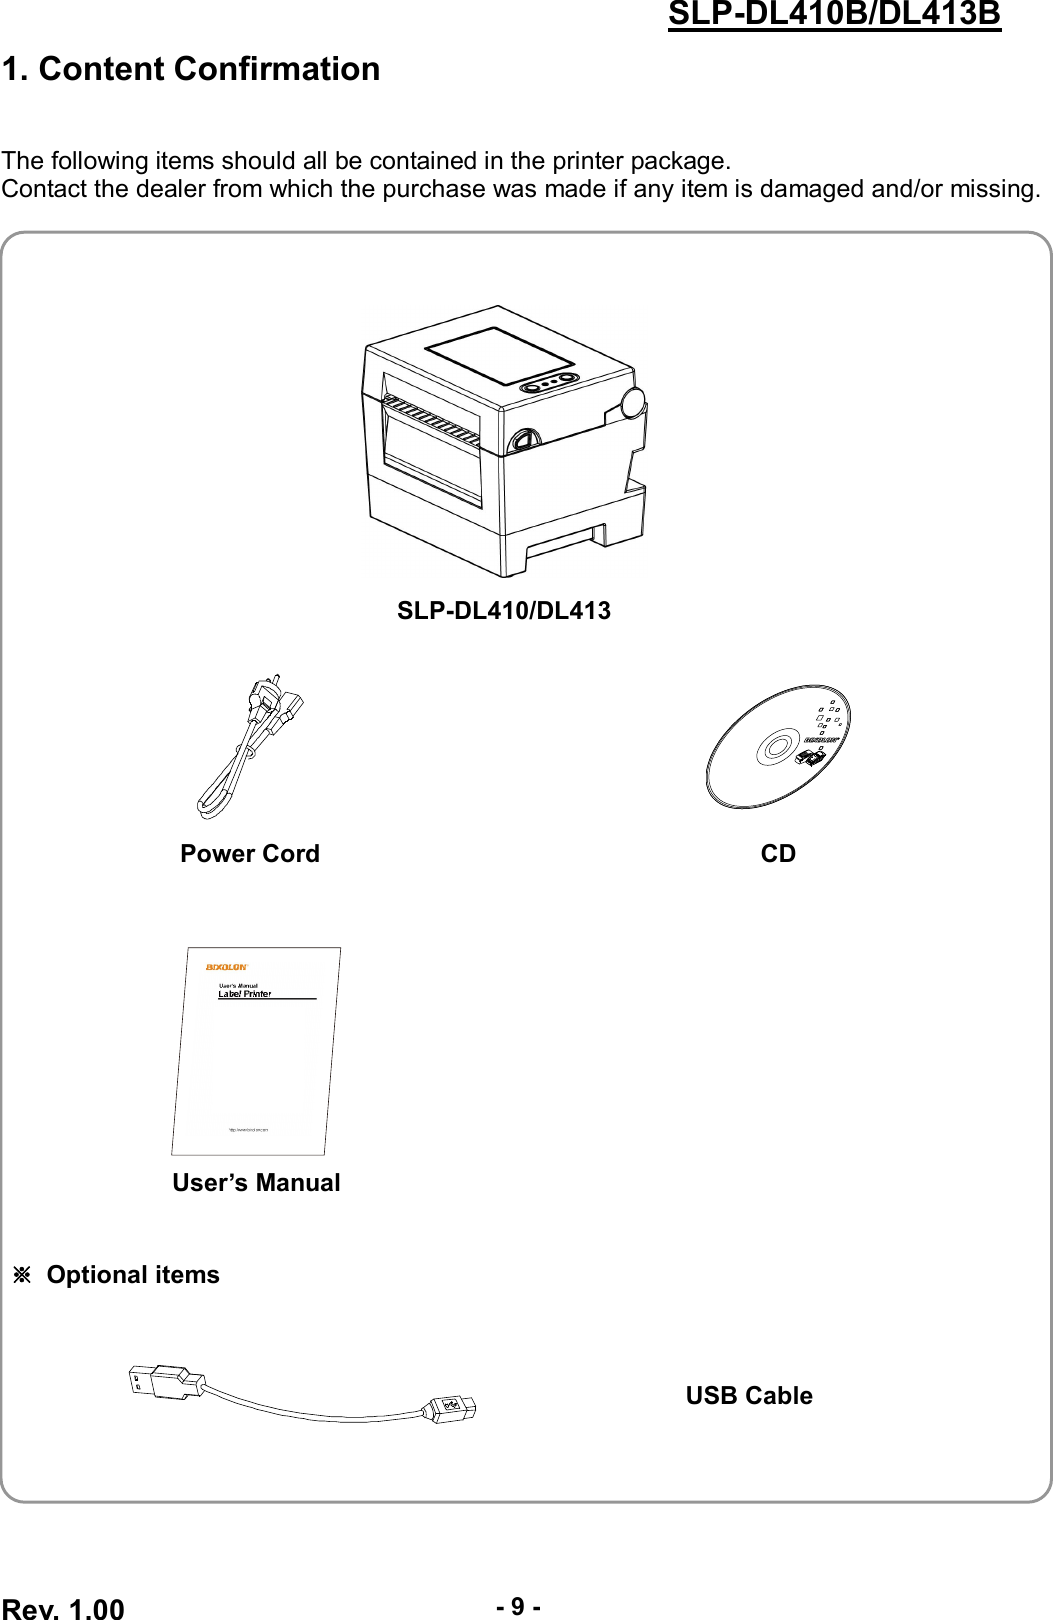  Rev. 1.00 - 9 - SLP-DL410B/DL413B 1. Content Confirmation   The following items should all be contained in the printer package. Contact the dealer from which the purchase was made if any item is damaged and/or missing.     SLP-DL410/DL413    Power Cord  CD     User’s Manual     ※  Optional items     USB Cable    